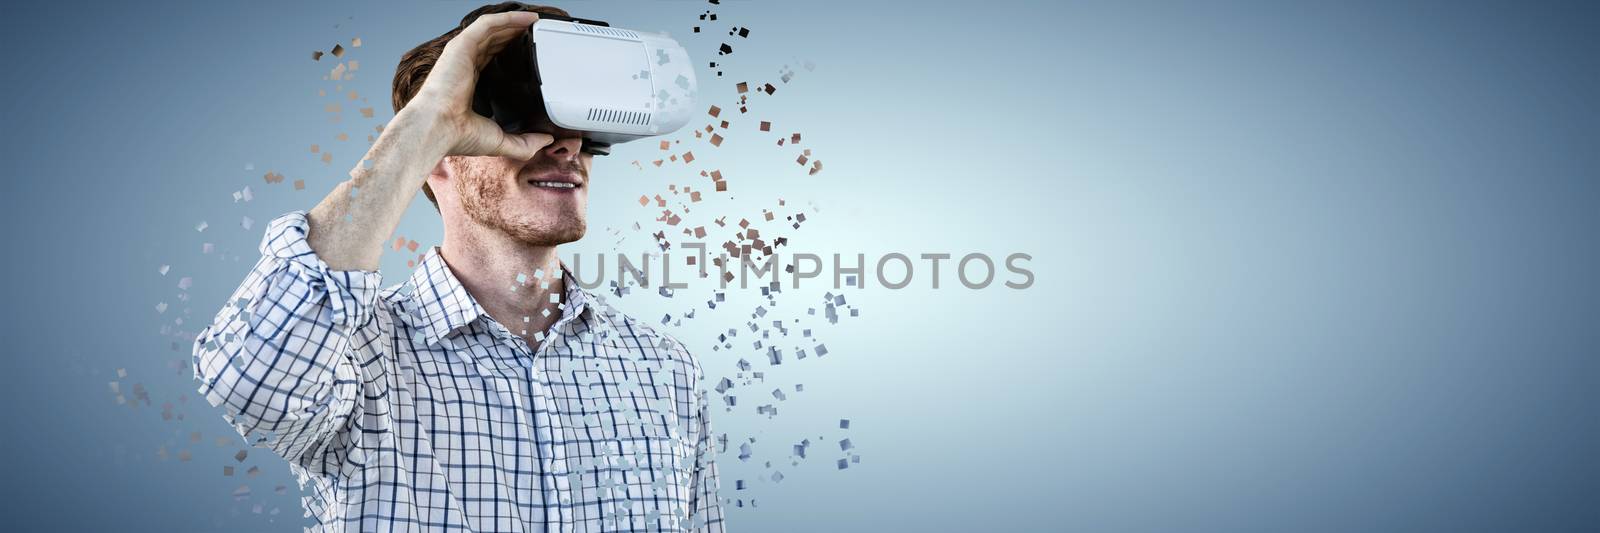 Smiling businessman working with VR against abstract blue background